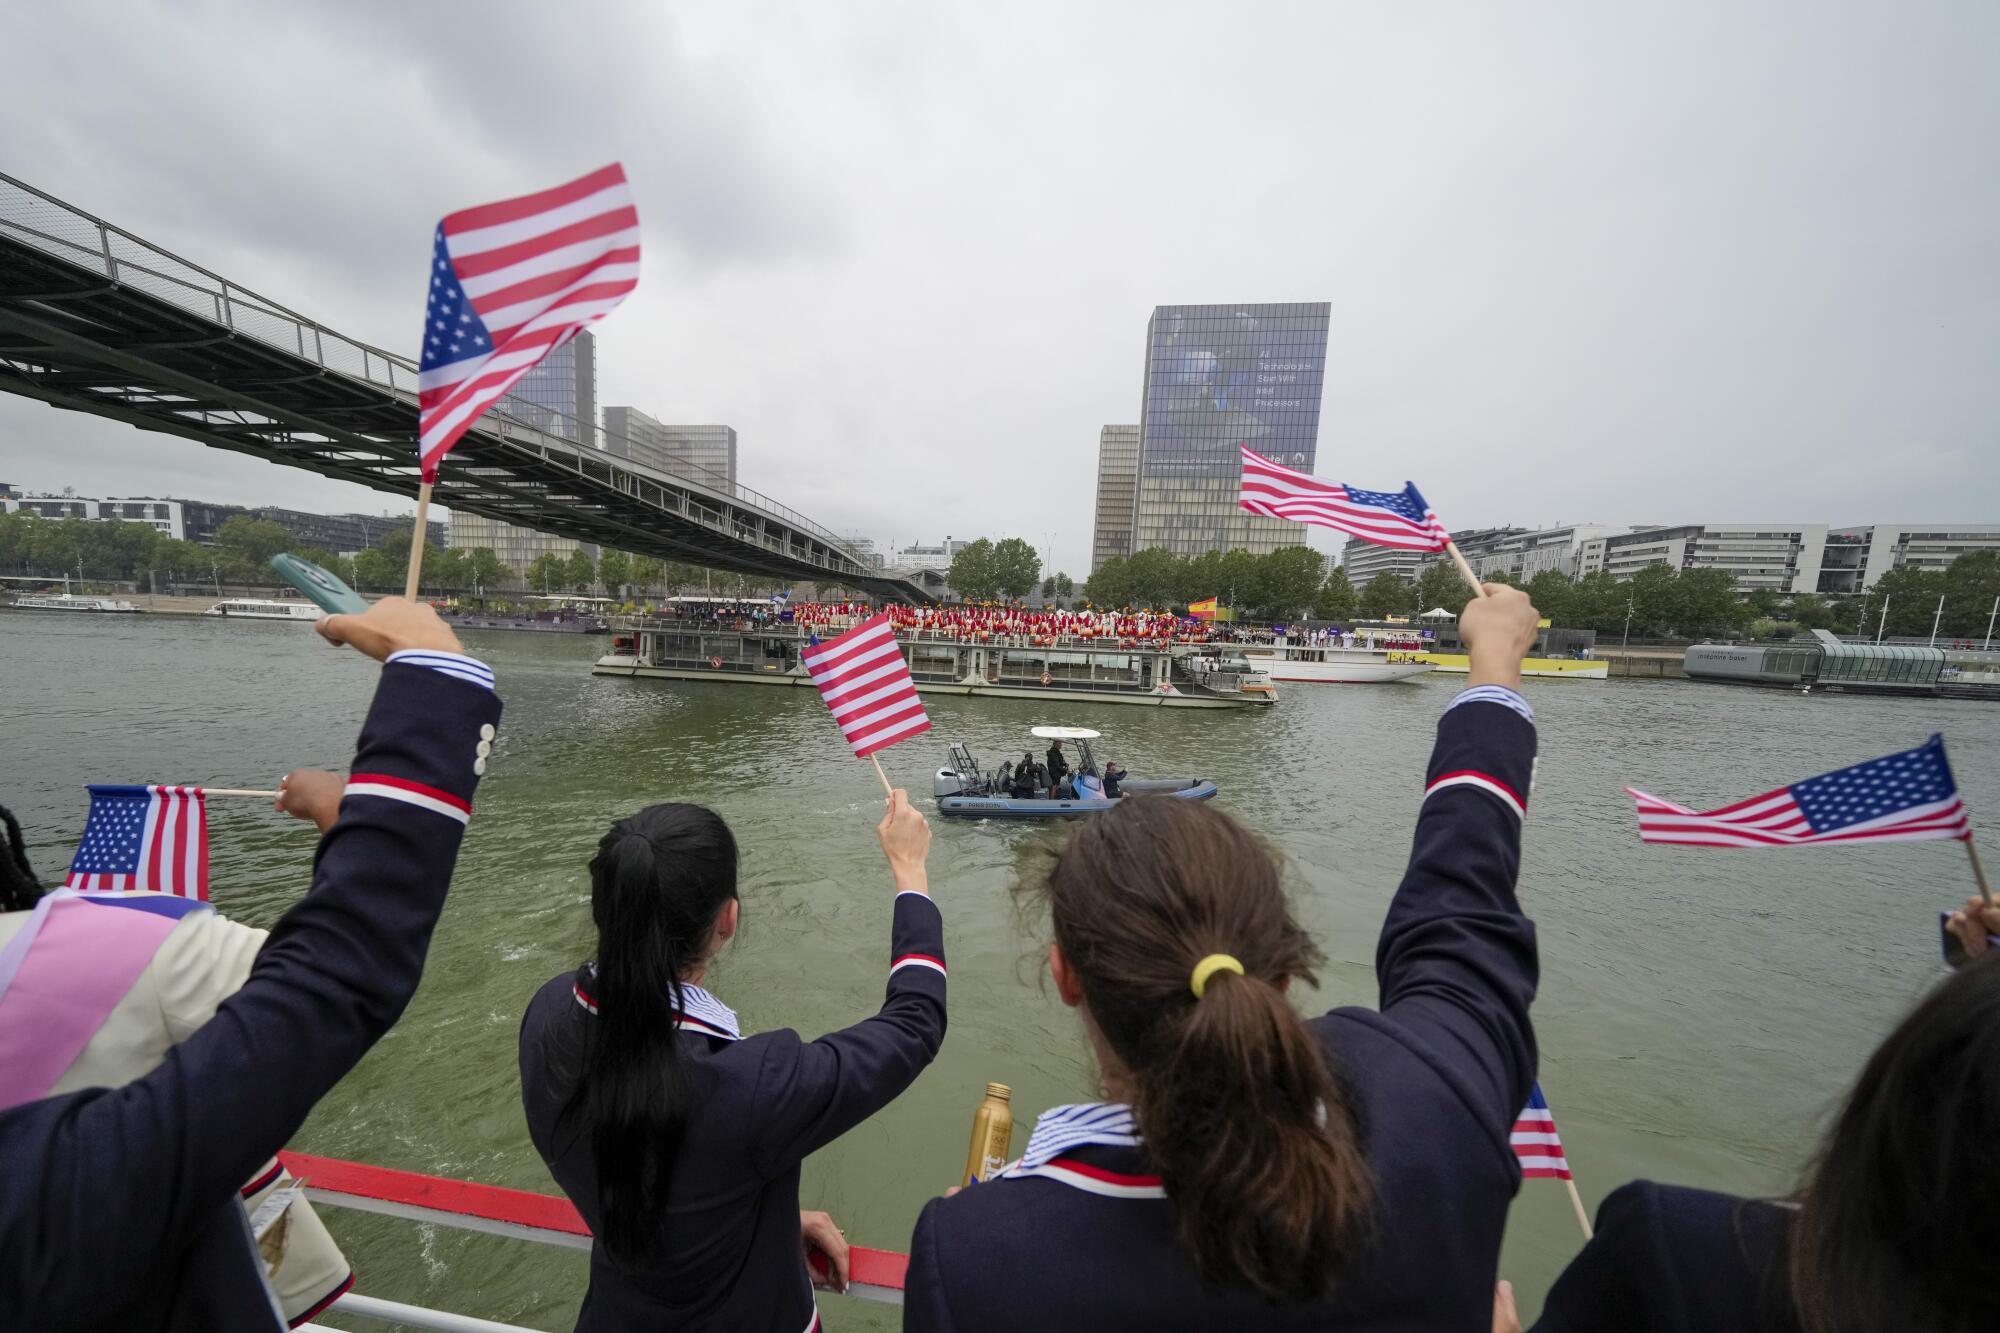 Members of the United States Team wave flags as they travel along the Seine River in Paris.